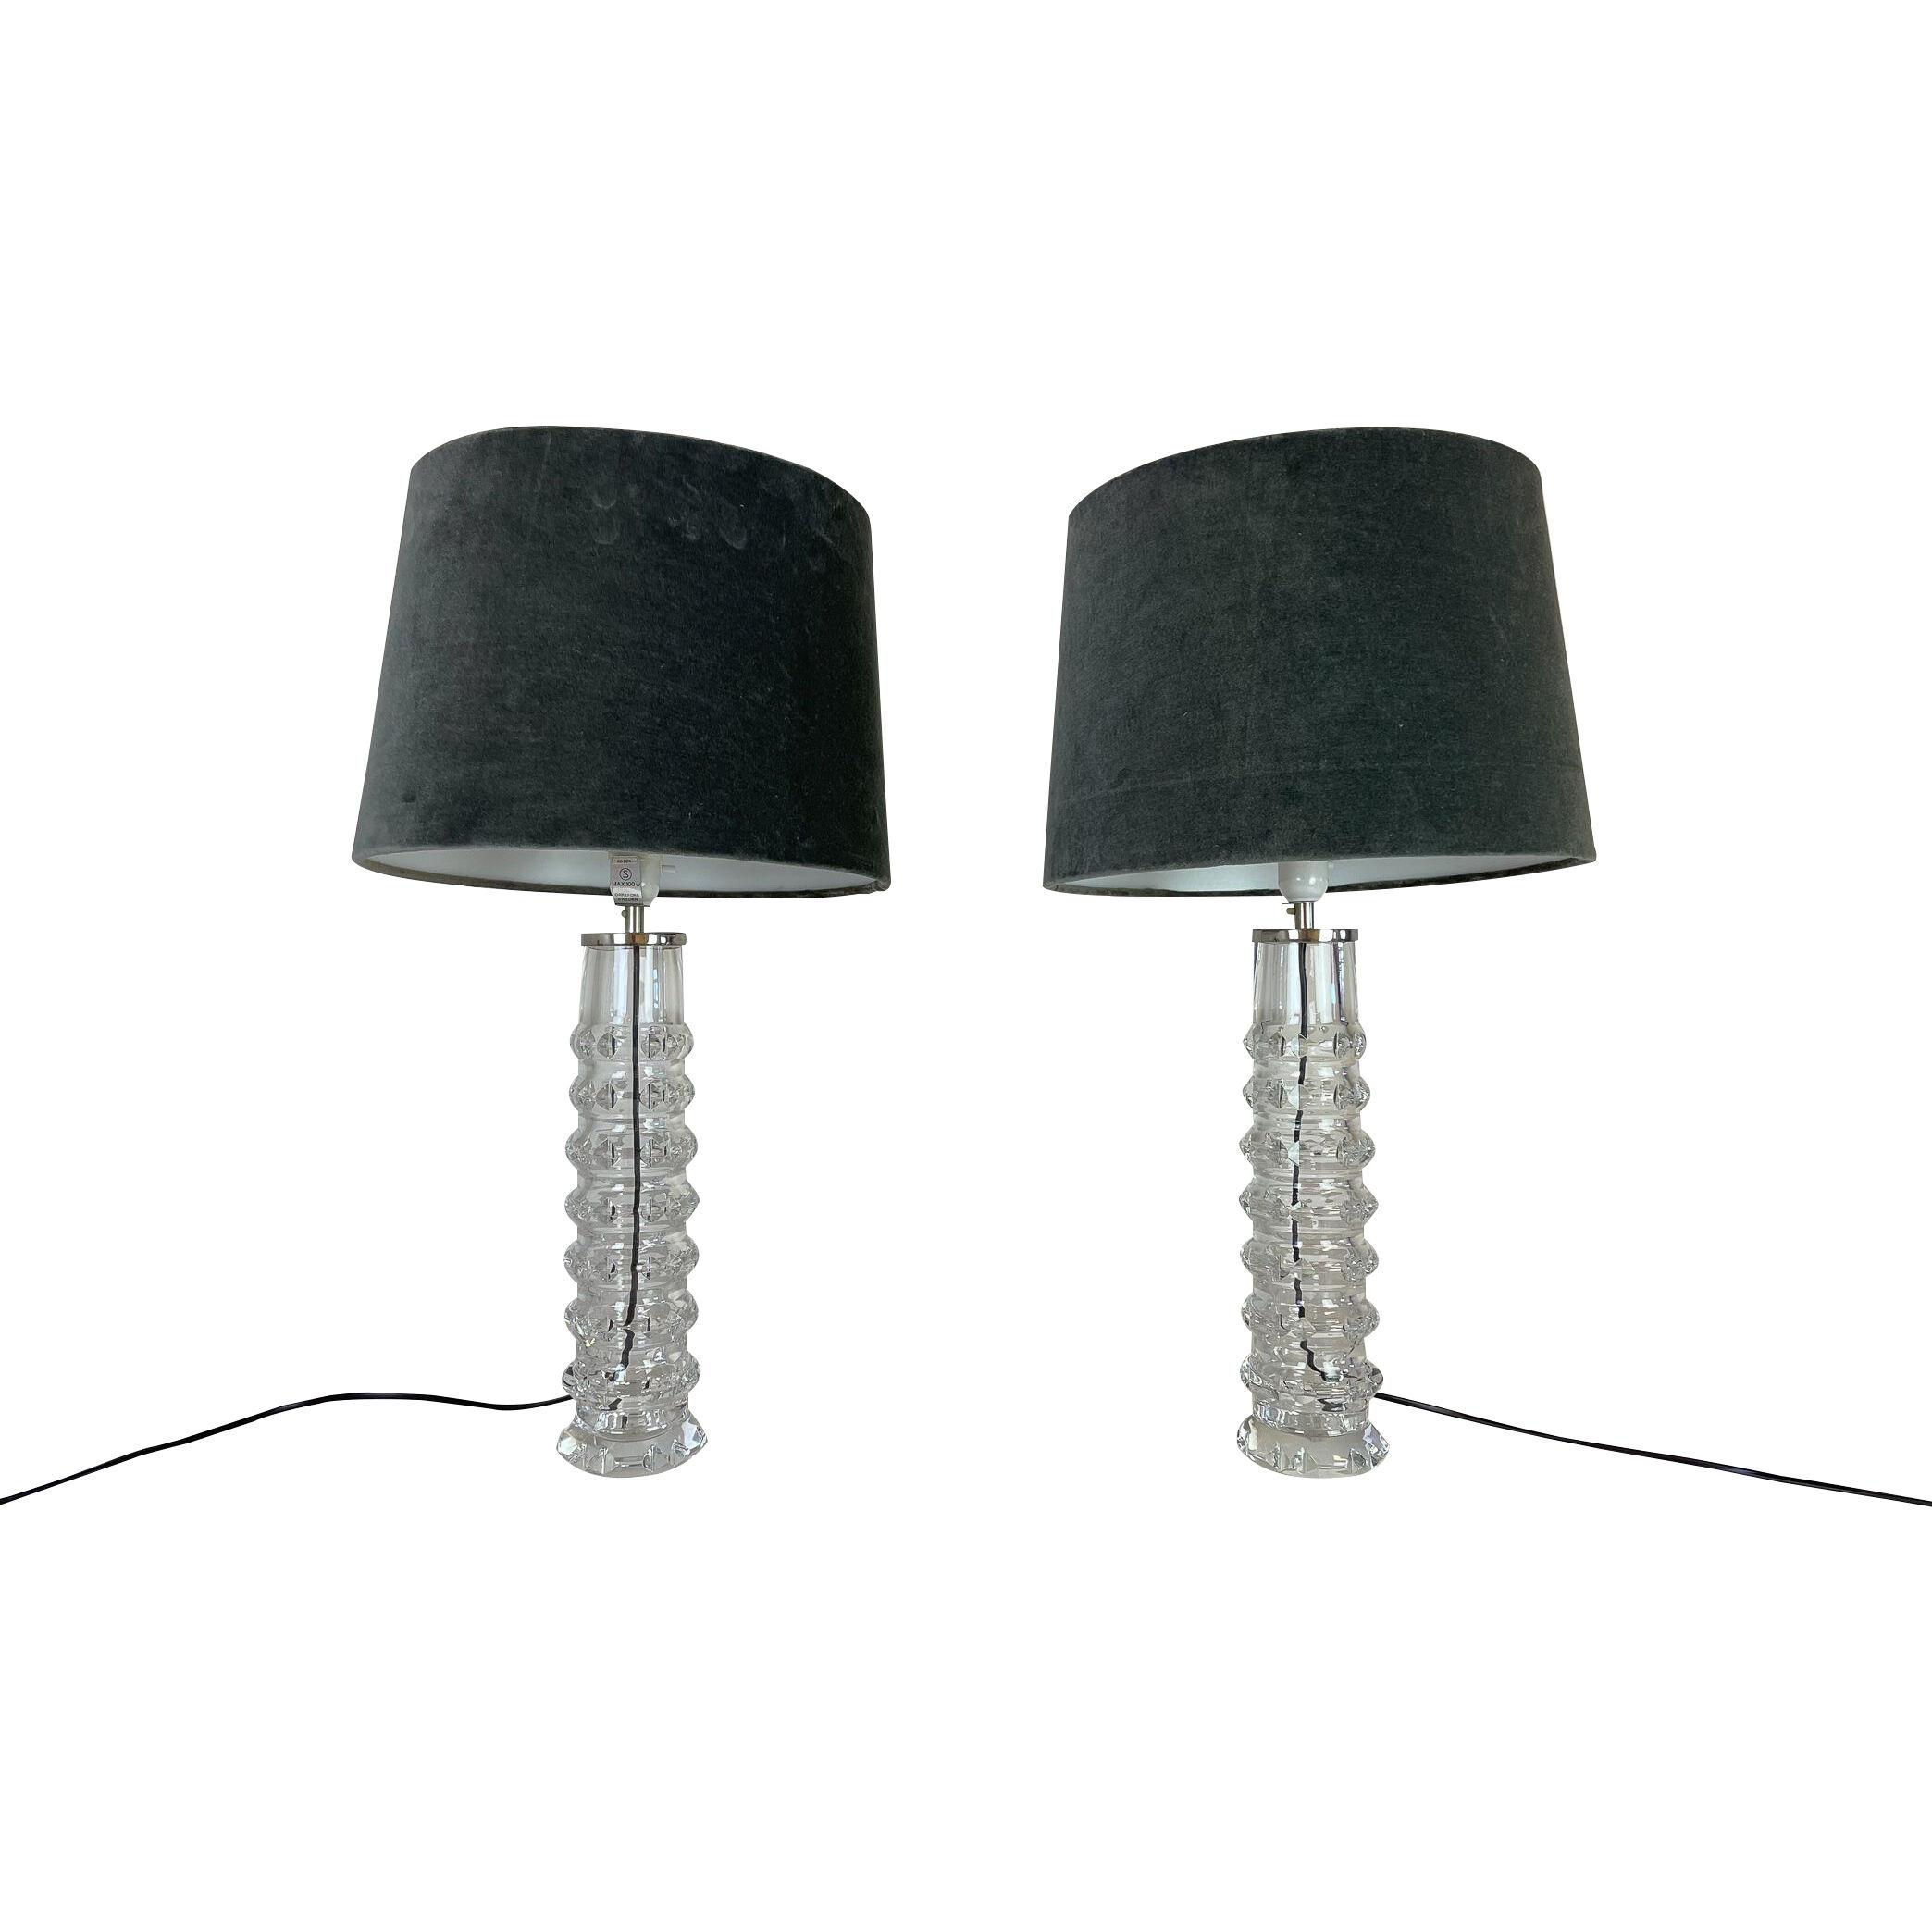 Midcentury Pair of Crystal Lamps by Carl Fagerlund for Orrefors Sweden, 1970s